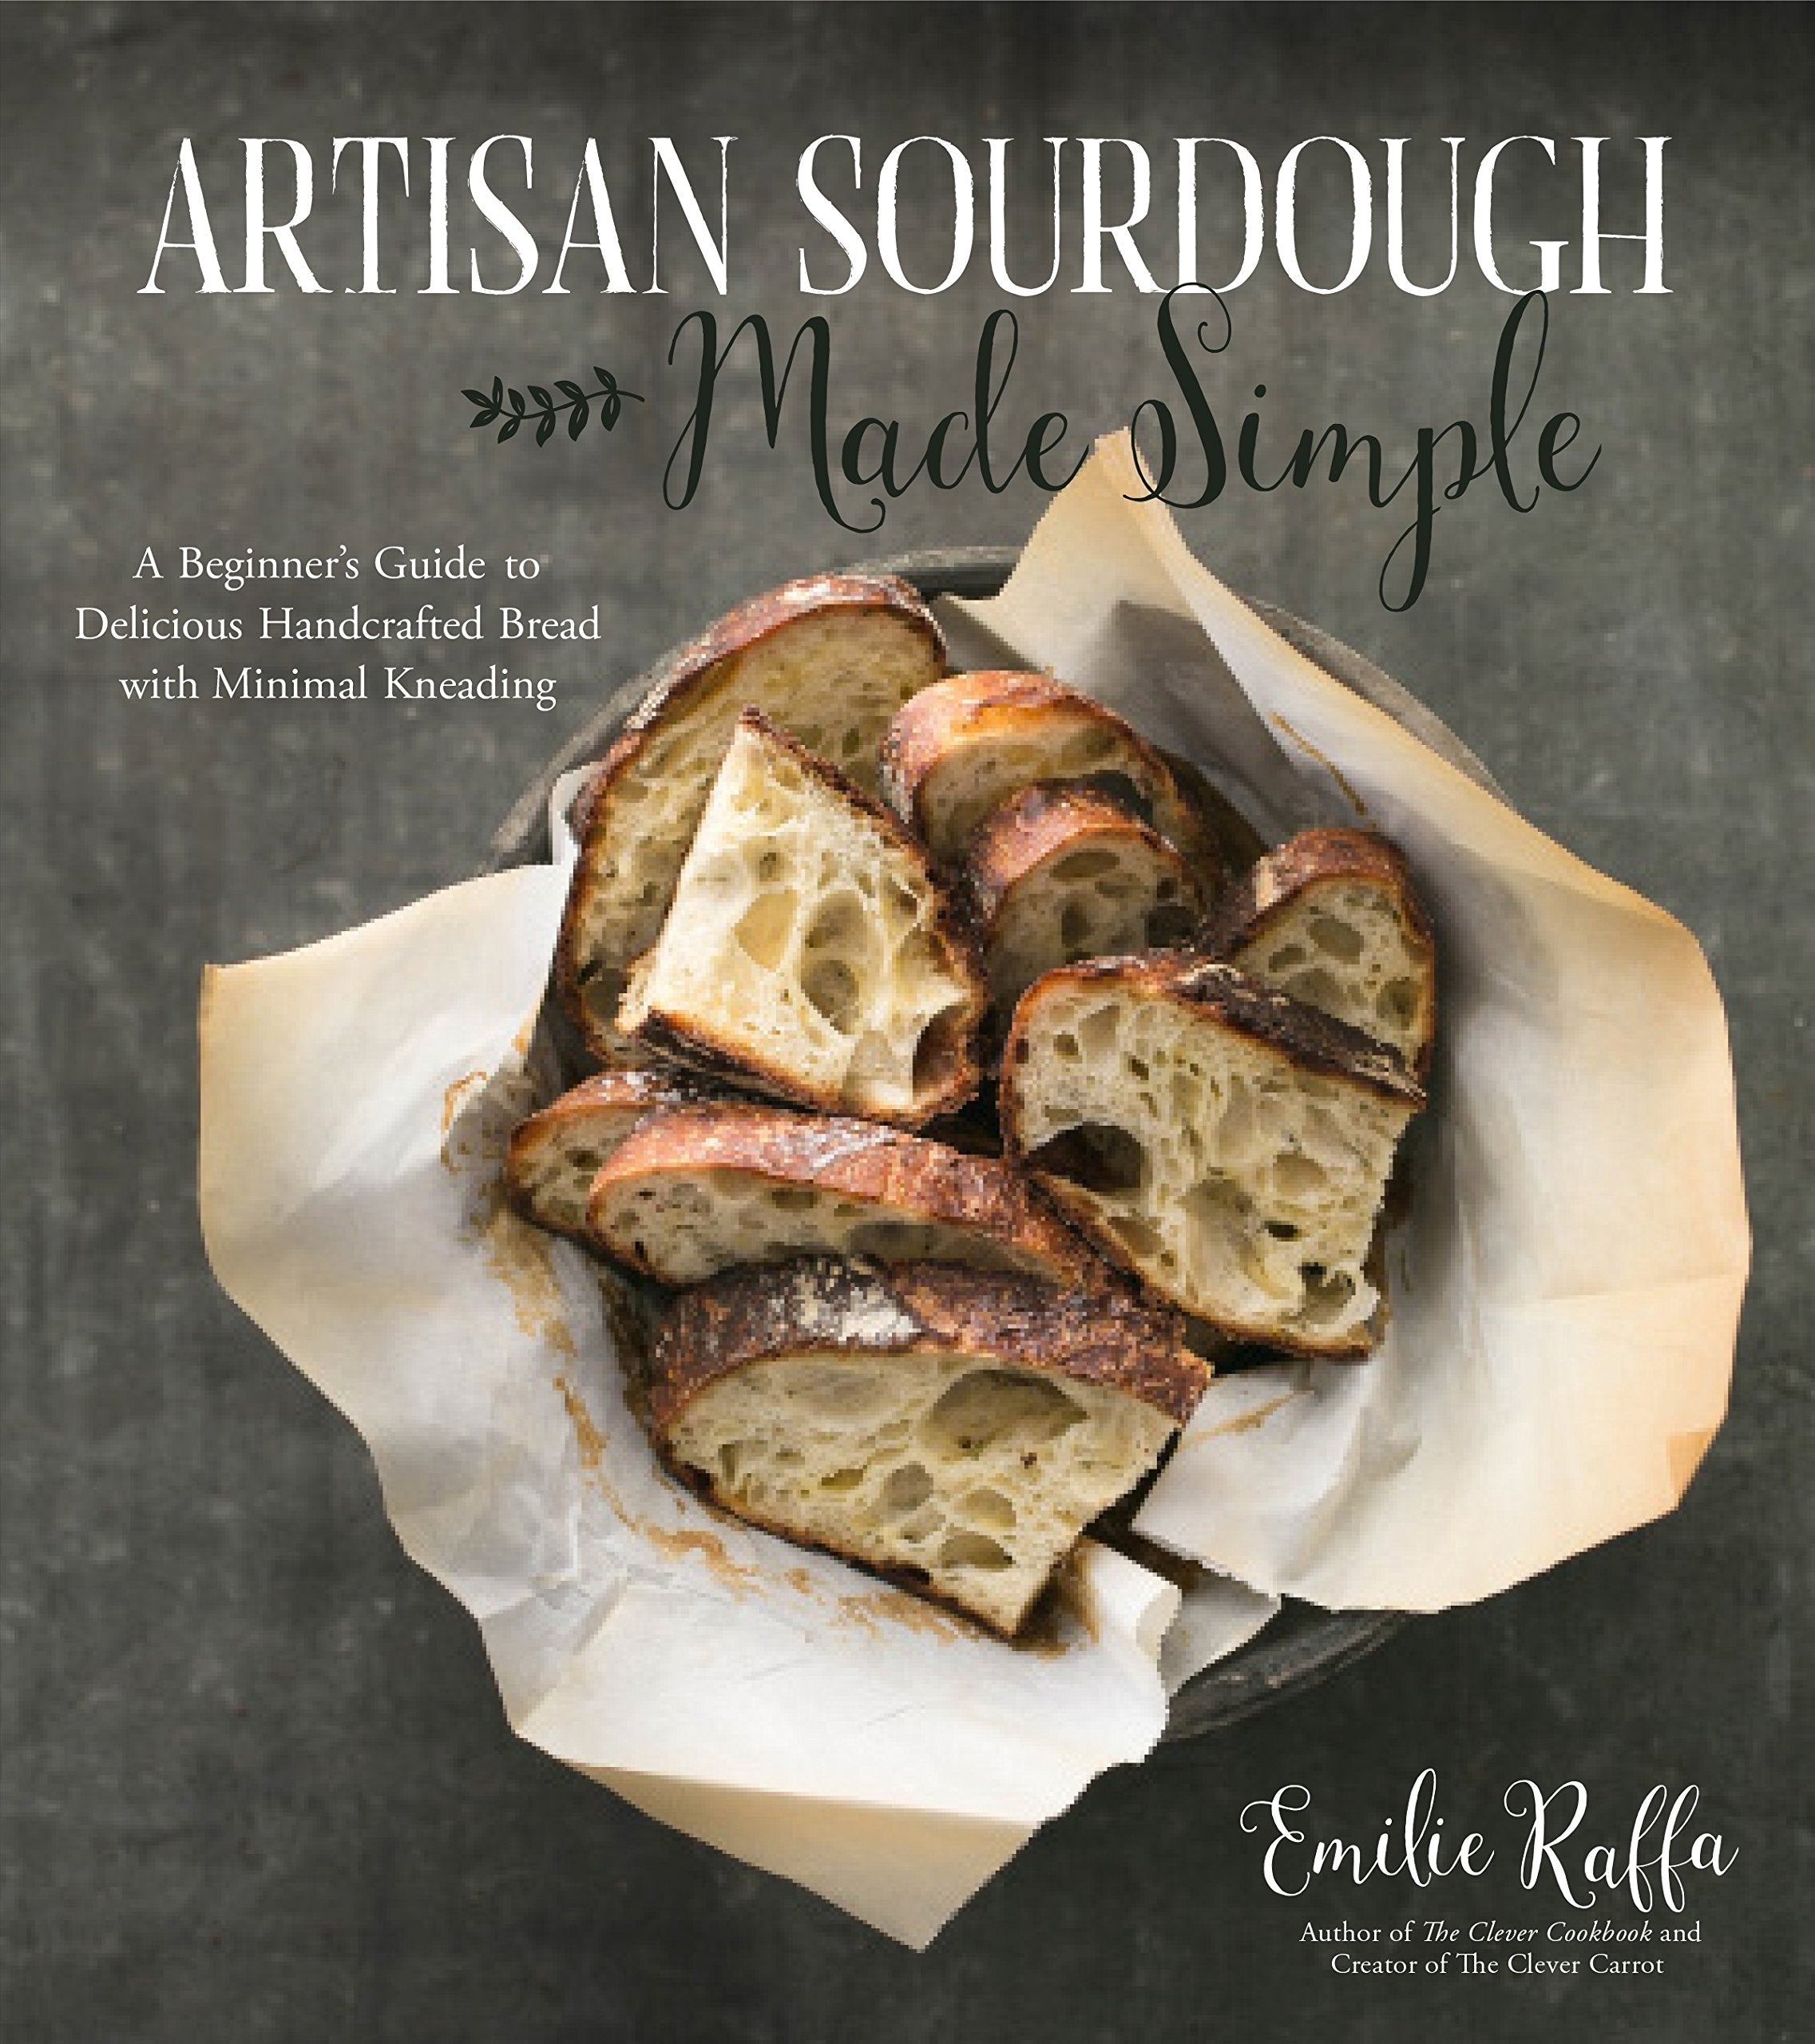 Whole Grain Sourdough at Home by Elaine Boddy: cookbook review